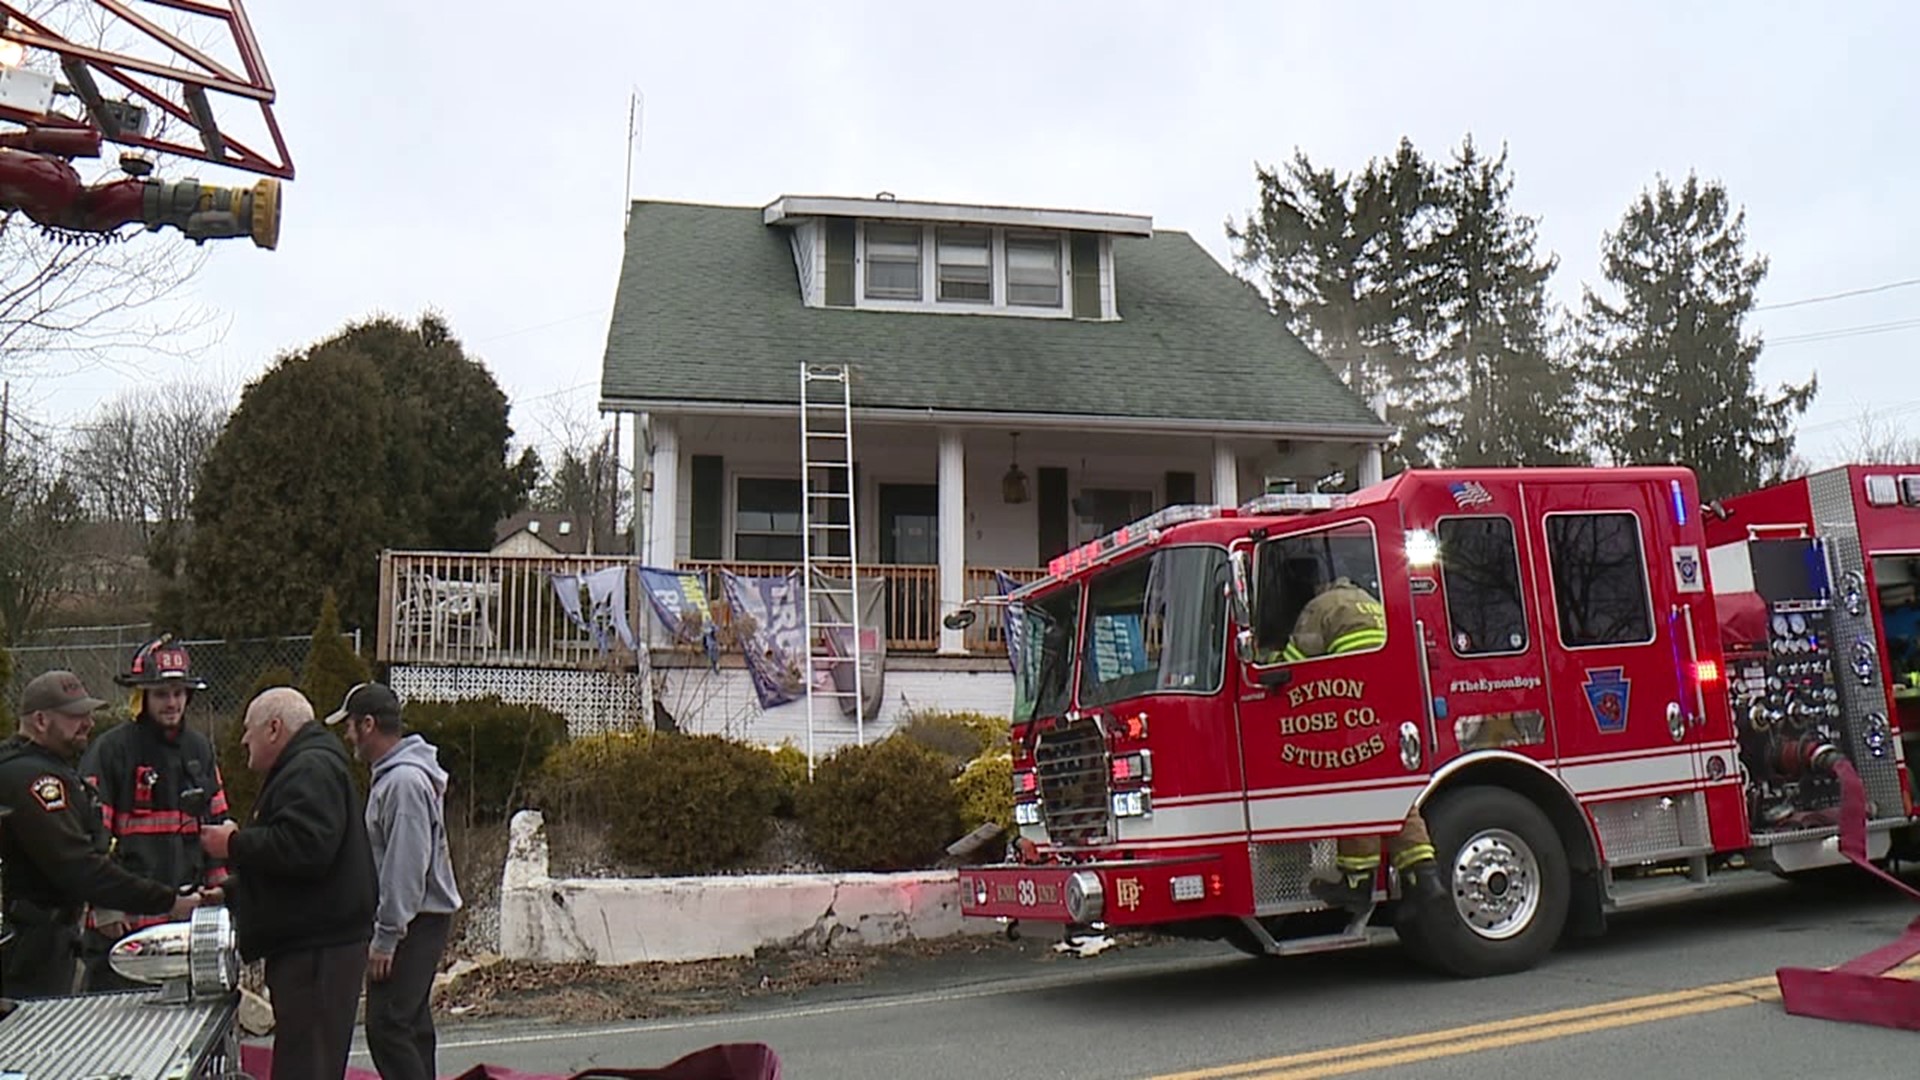 Flames broke out around noon Tuesday at a home along Wildcat Road in the borough.